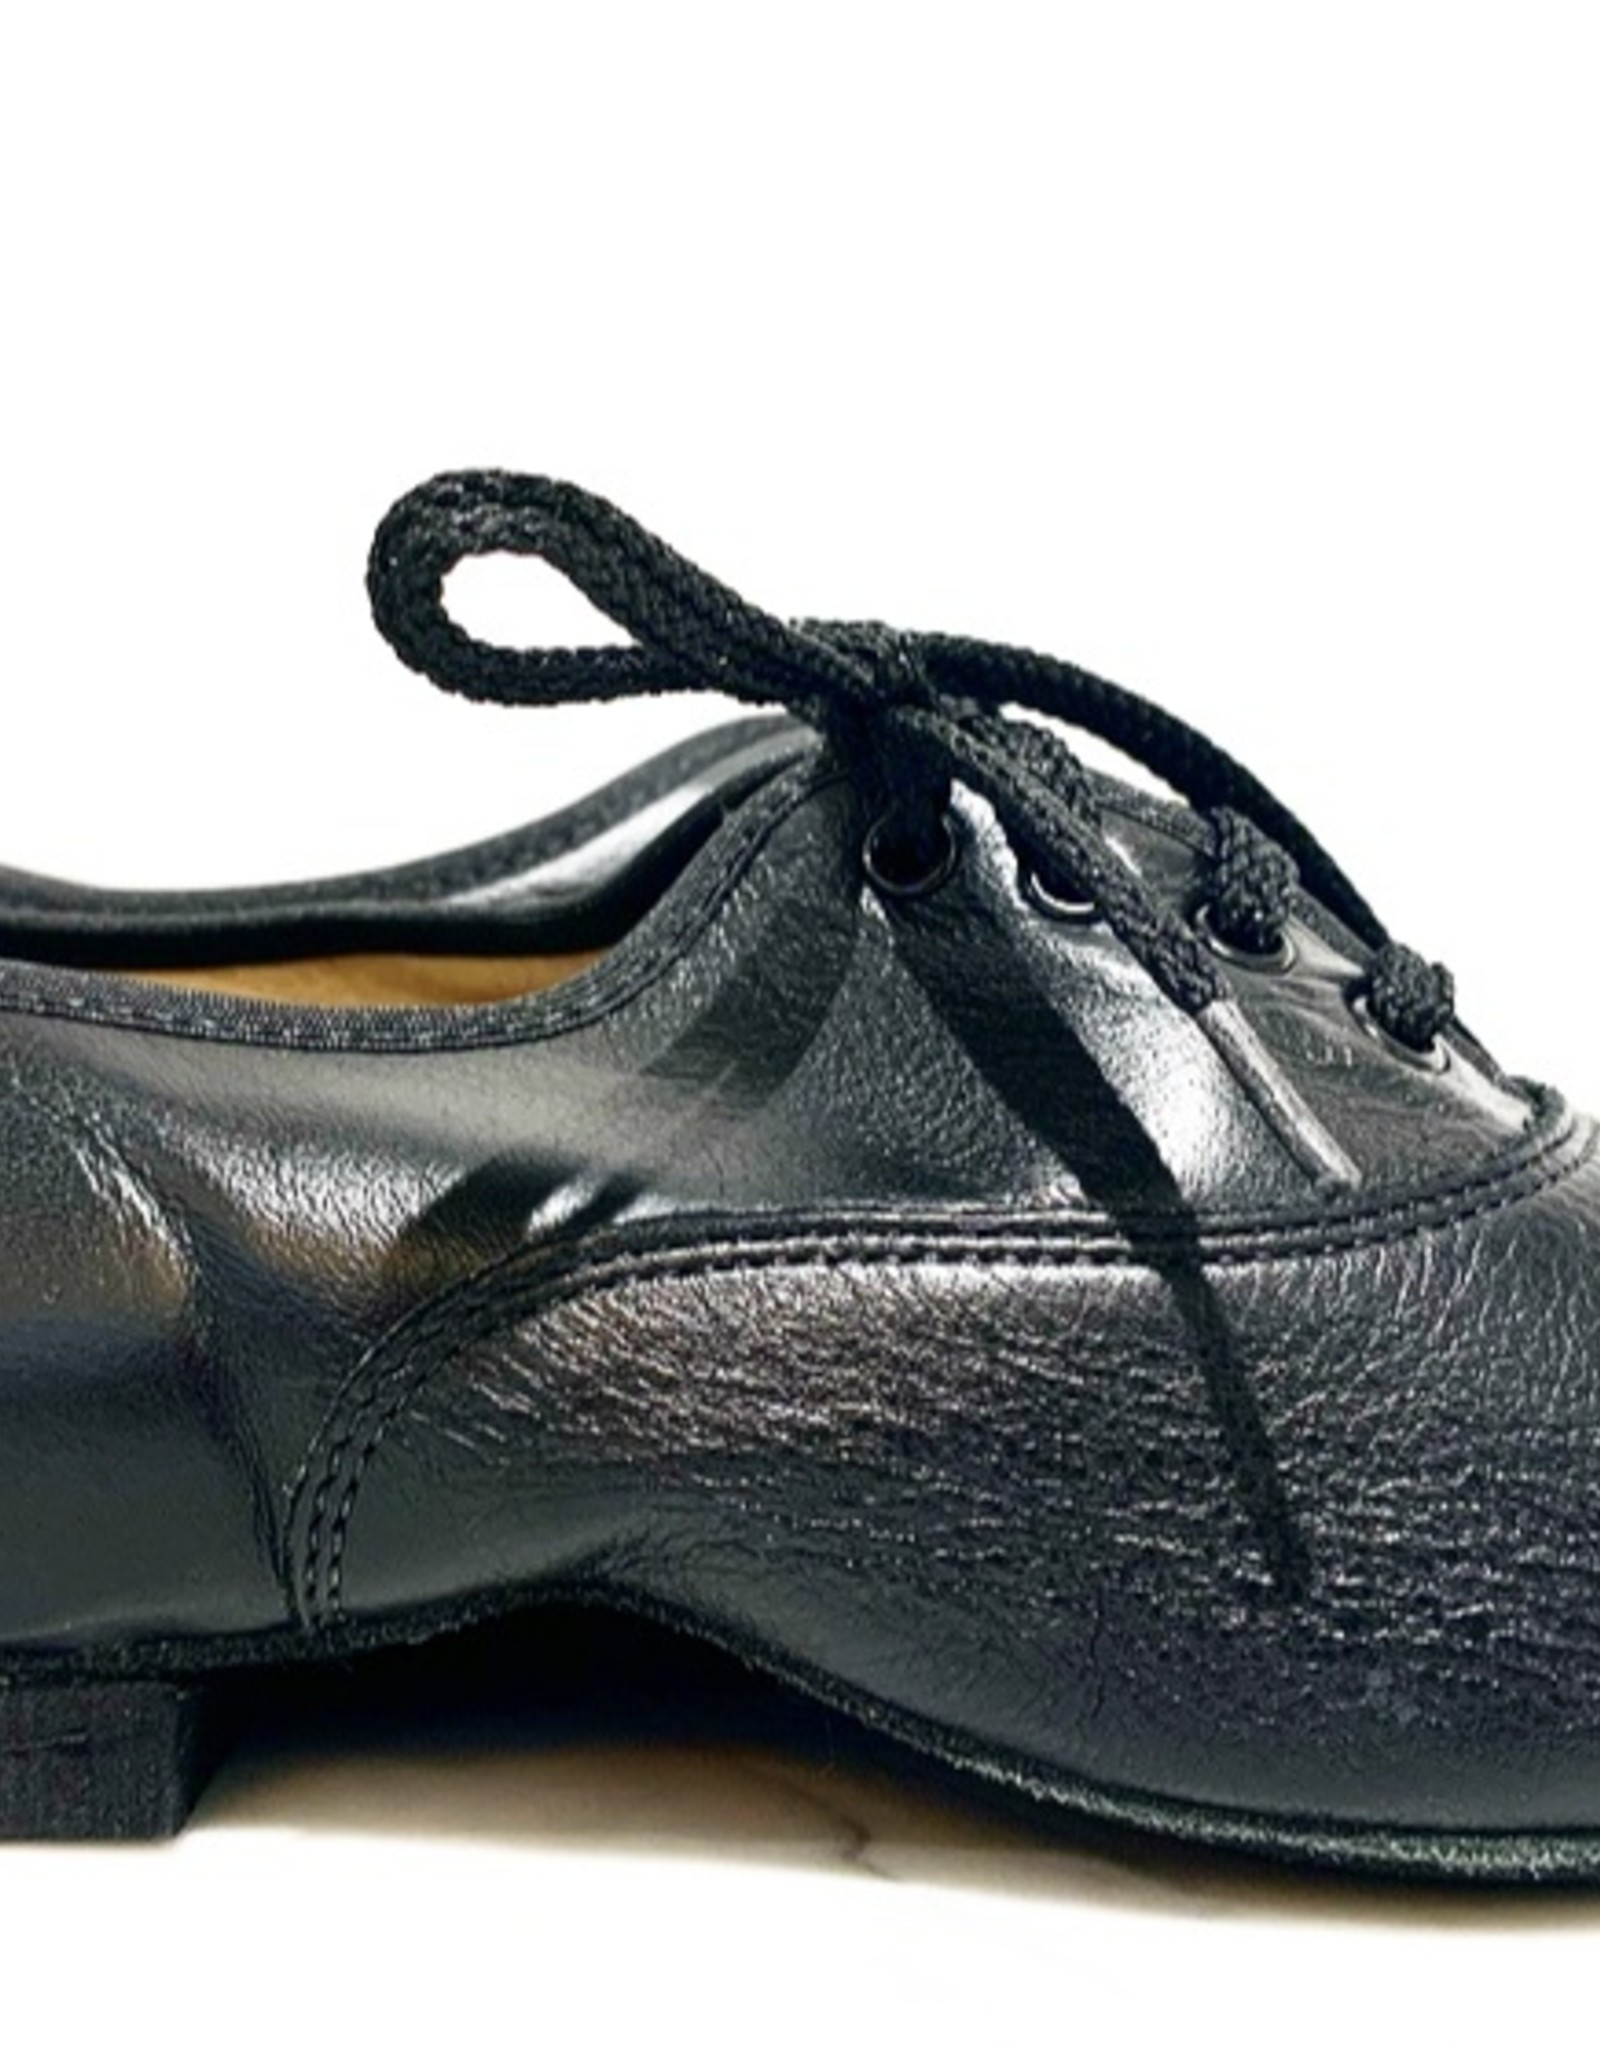 different types of jazz shoes